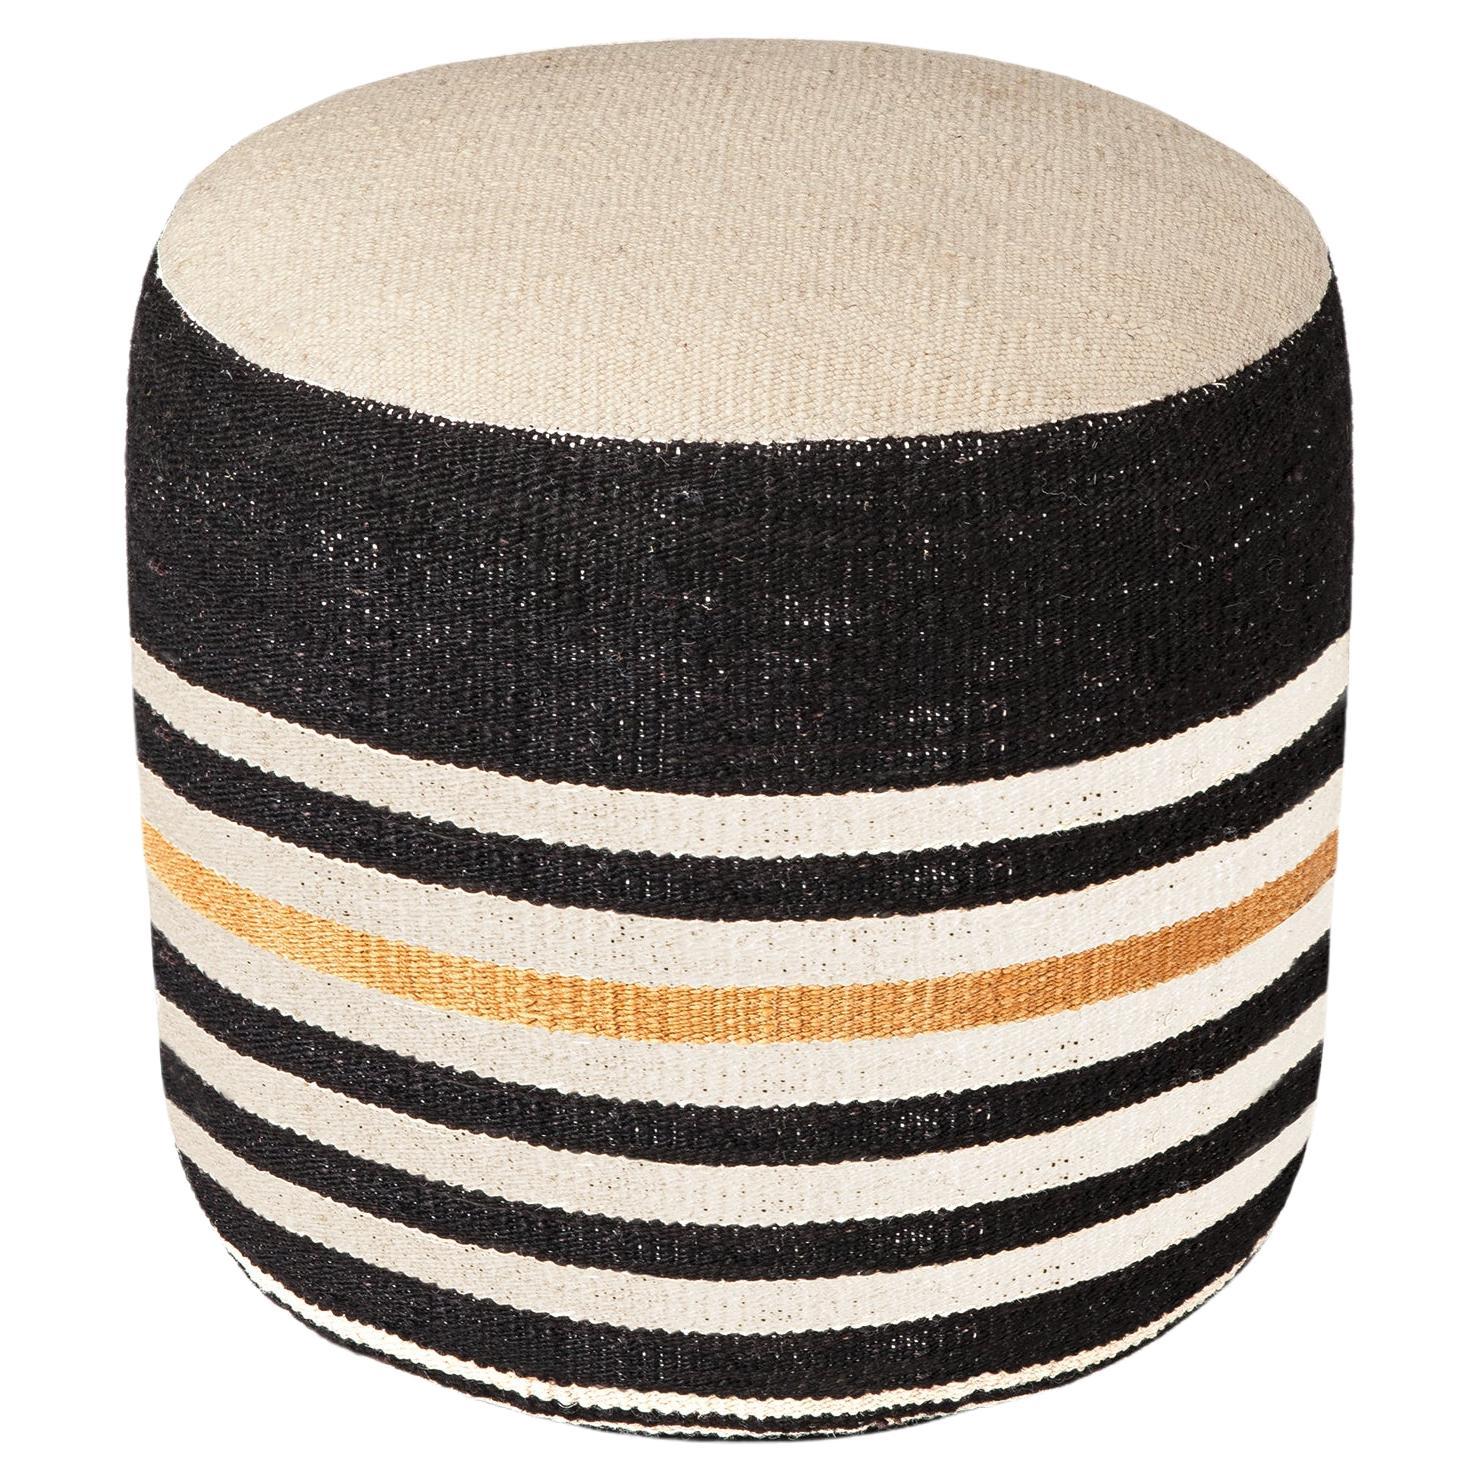 'Kilim 2' Pouf by Nani Marquina and Marcos Catalán for Nanimarquina